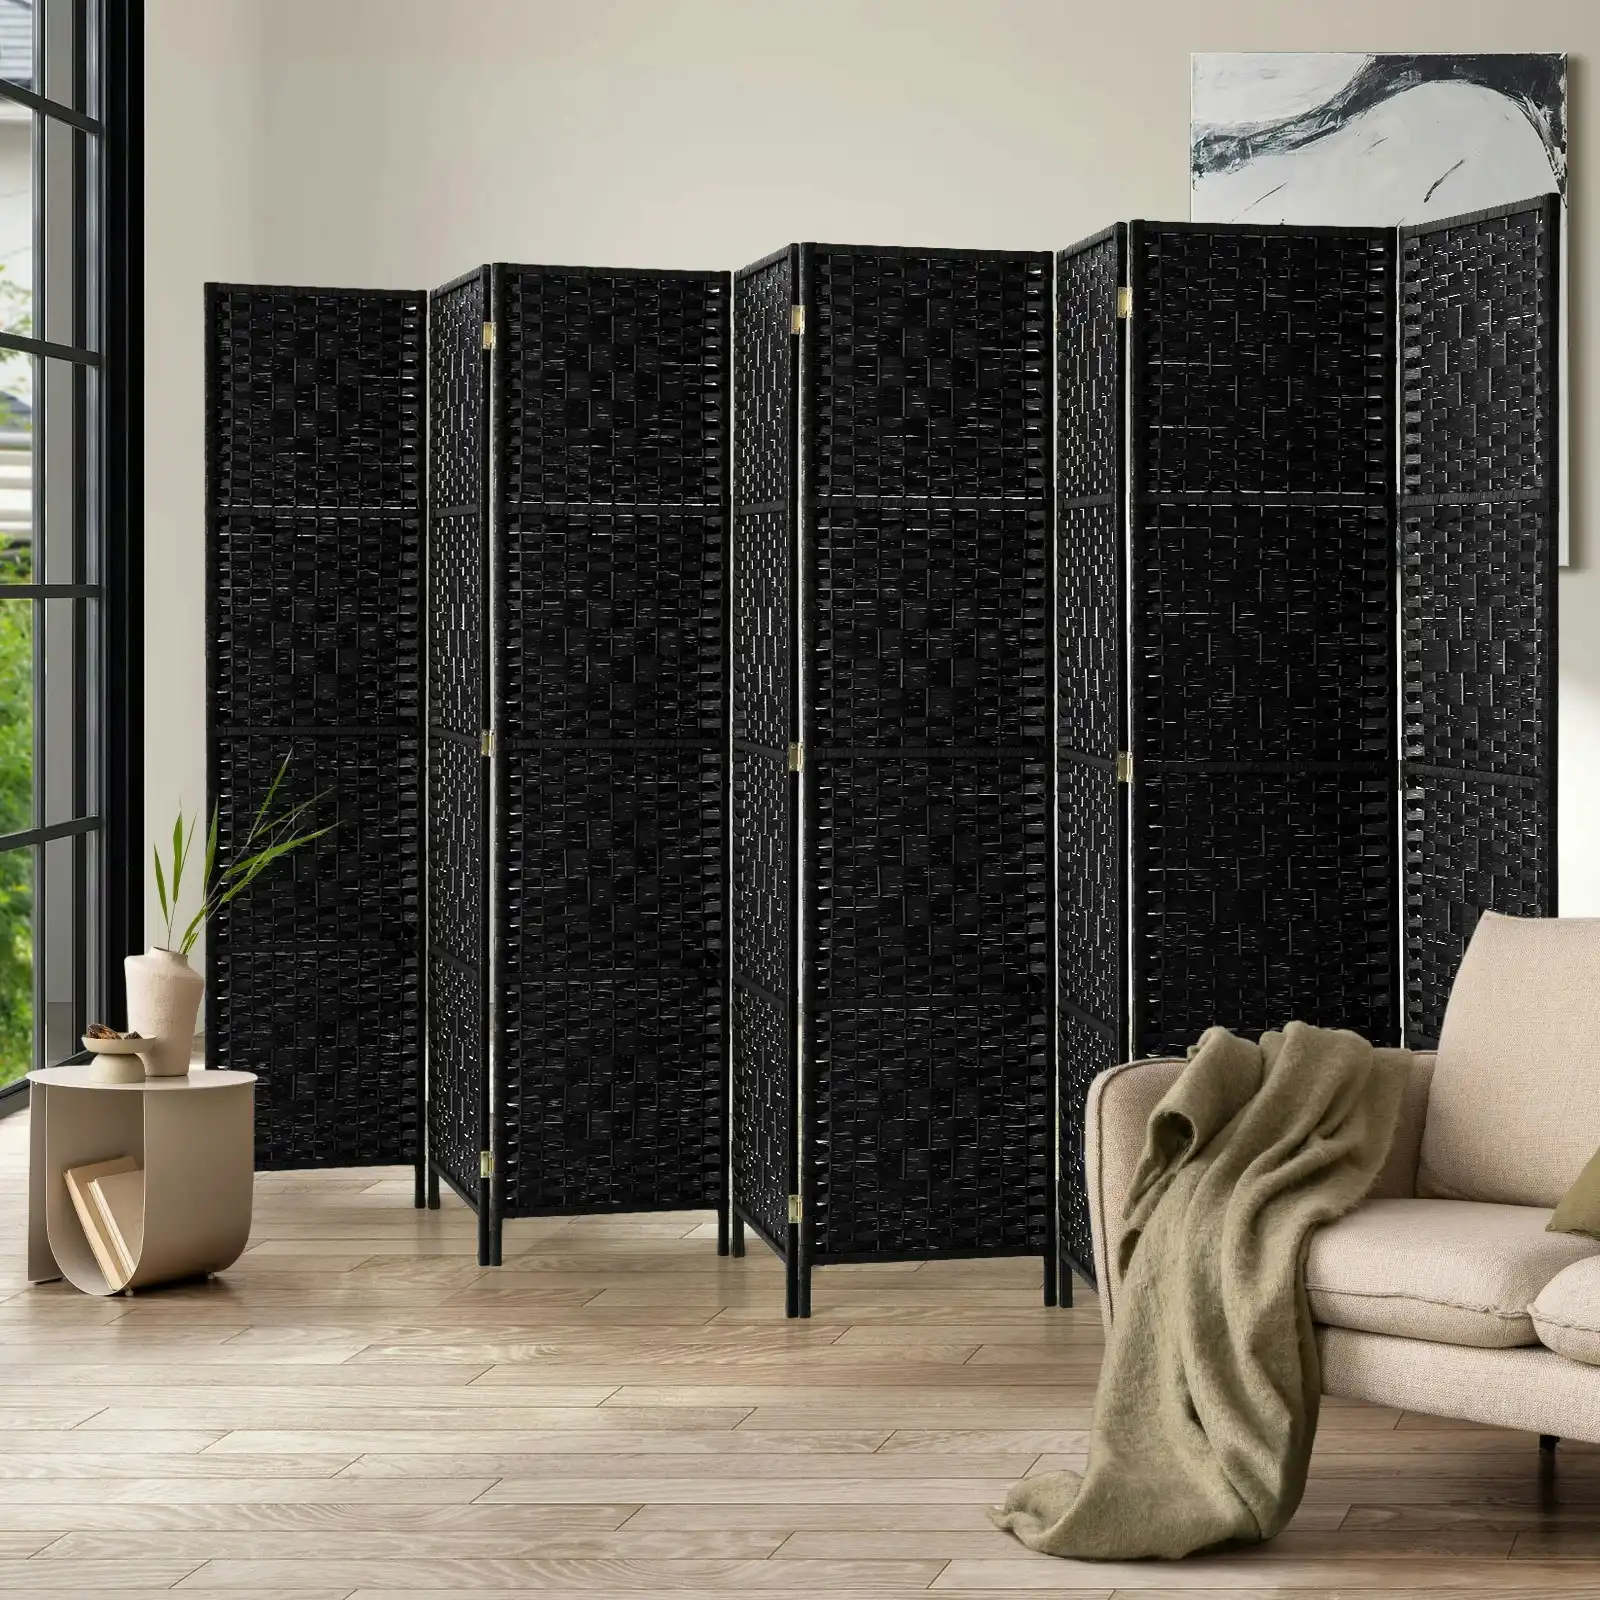 Oikiture 8 Panel Room Divider Screen Privacy Dividers Woven Wood Folding Black